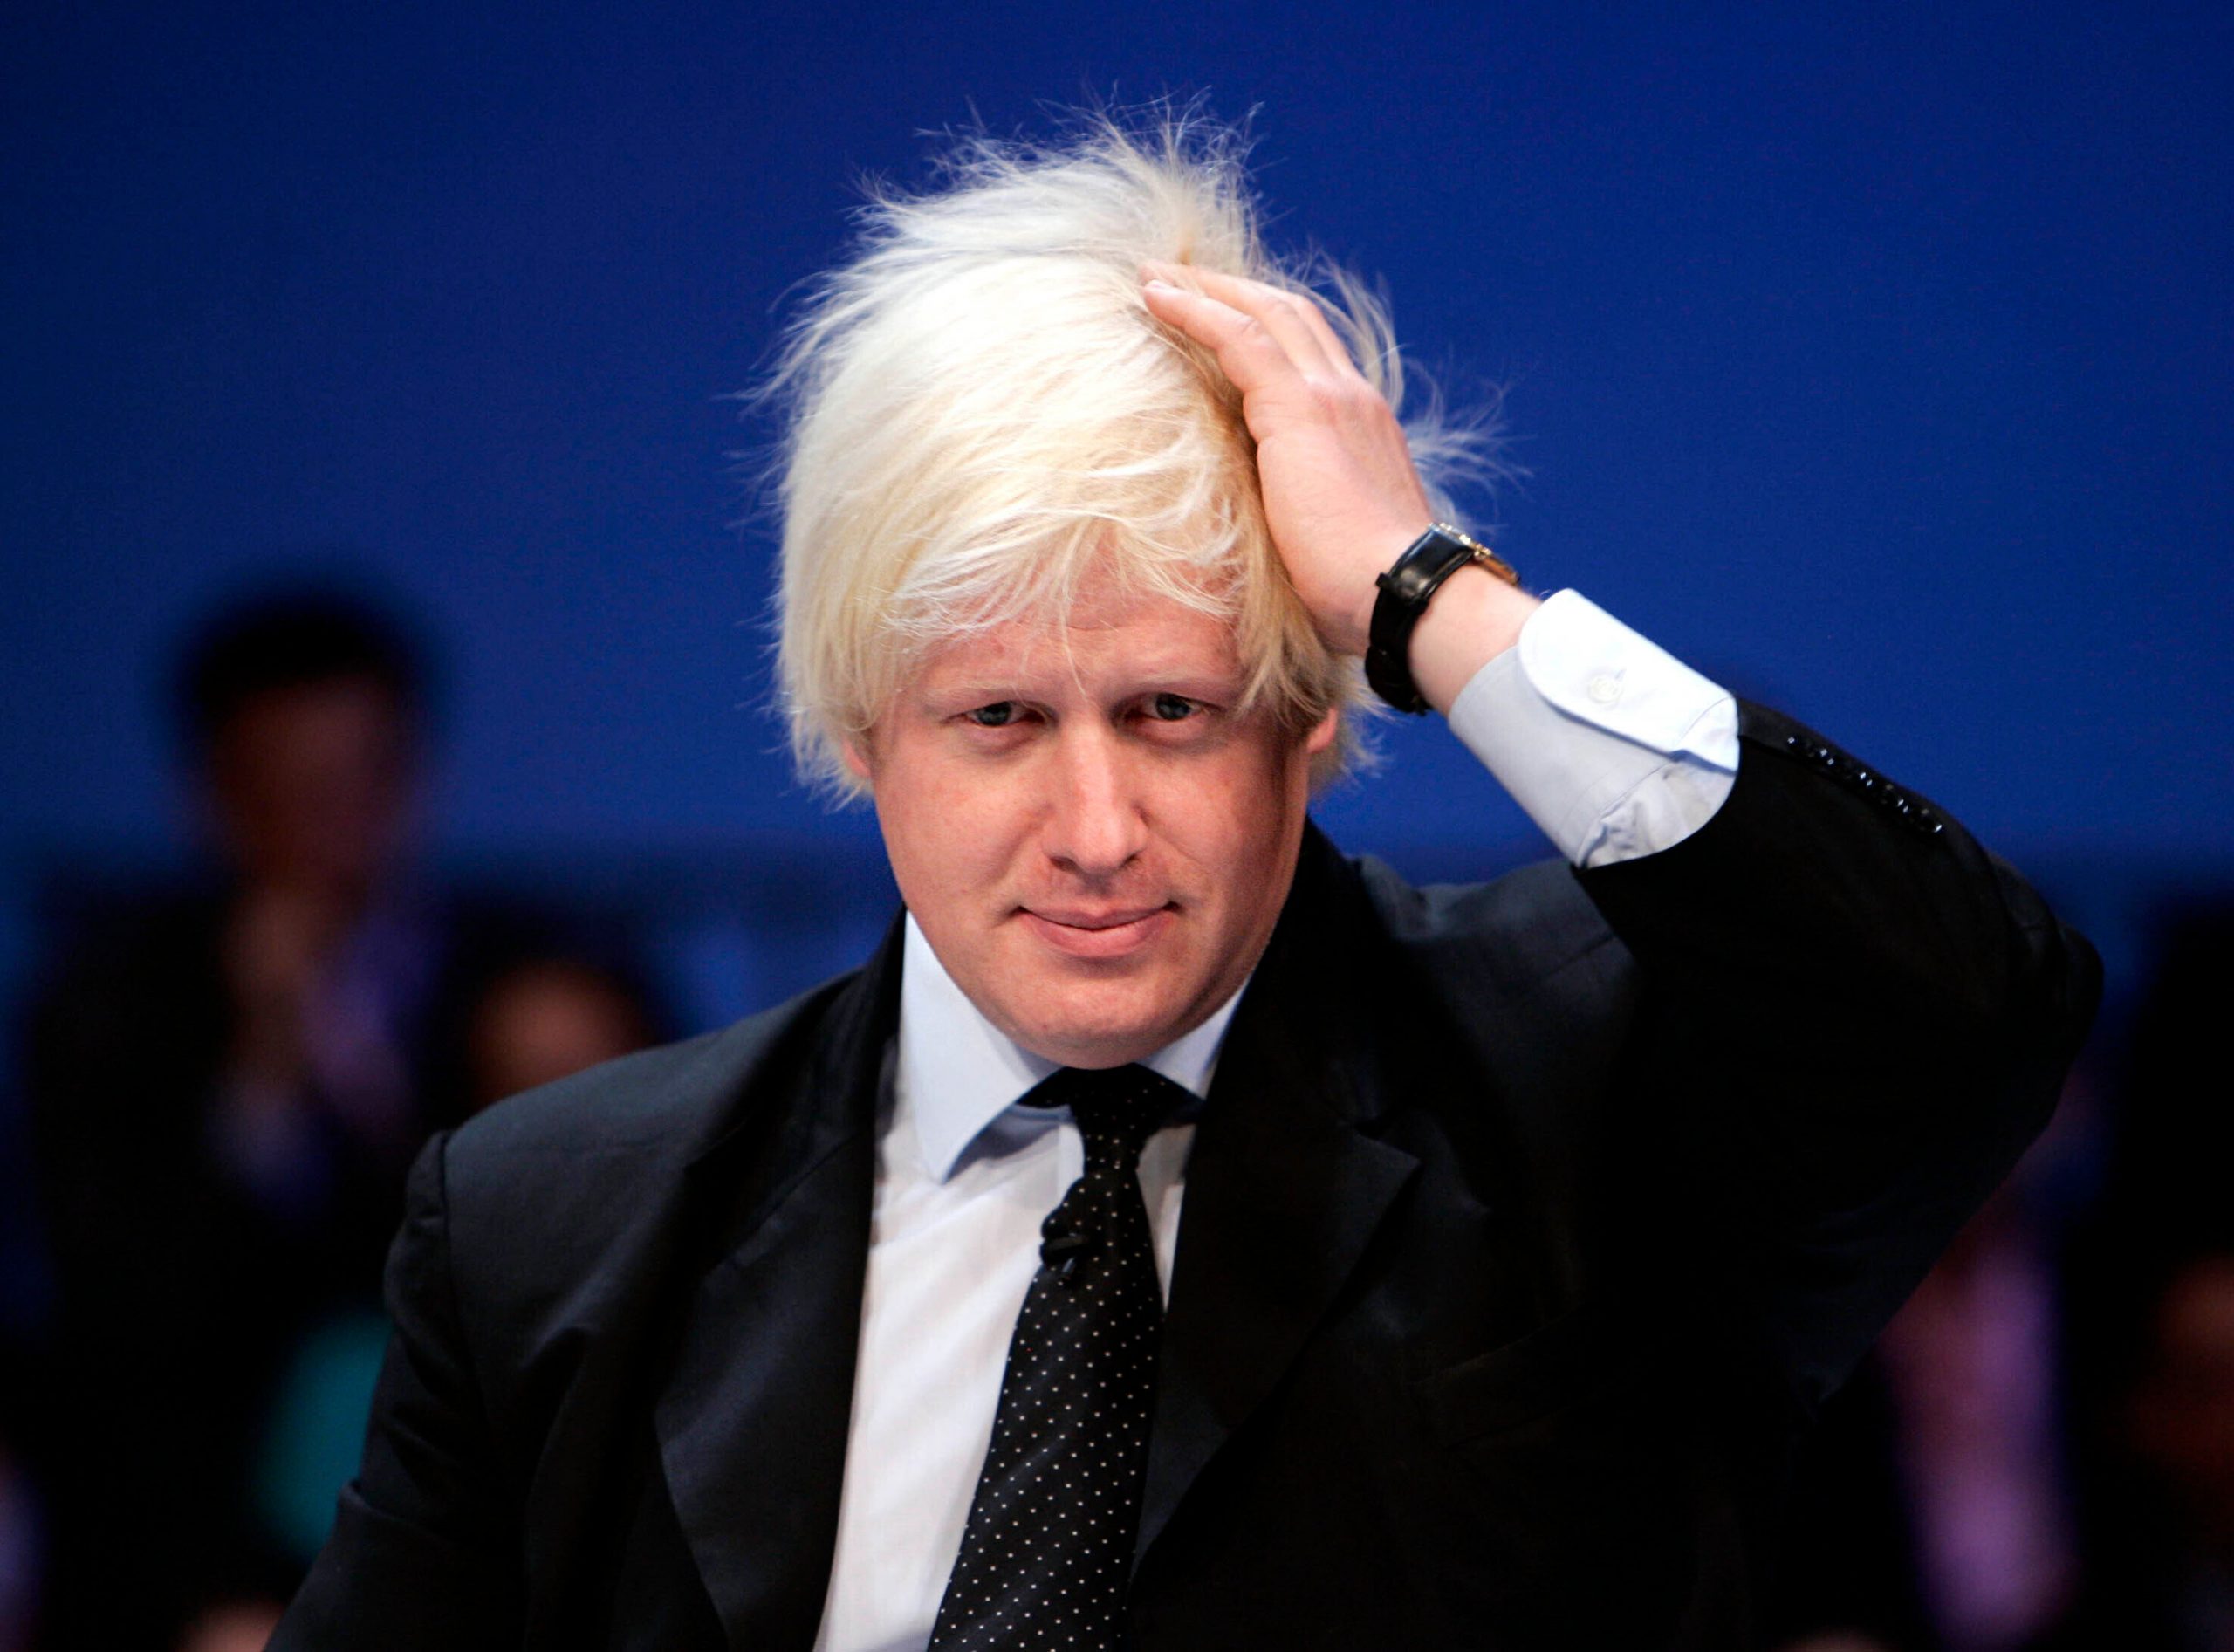 In 2008, former British PM Boris Johnson misused his power as a Mayor: Report